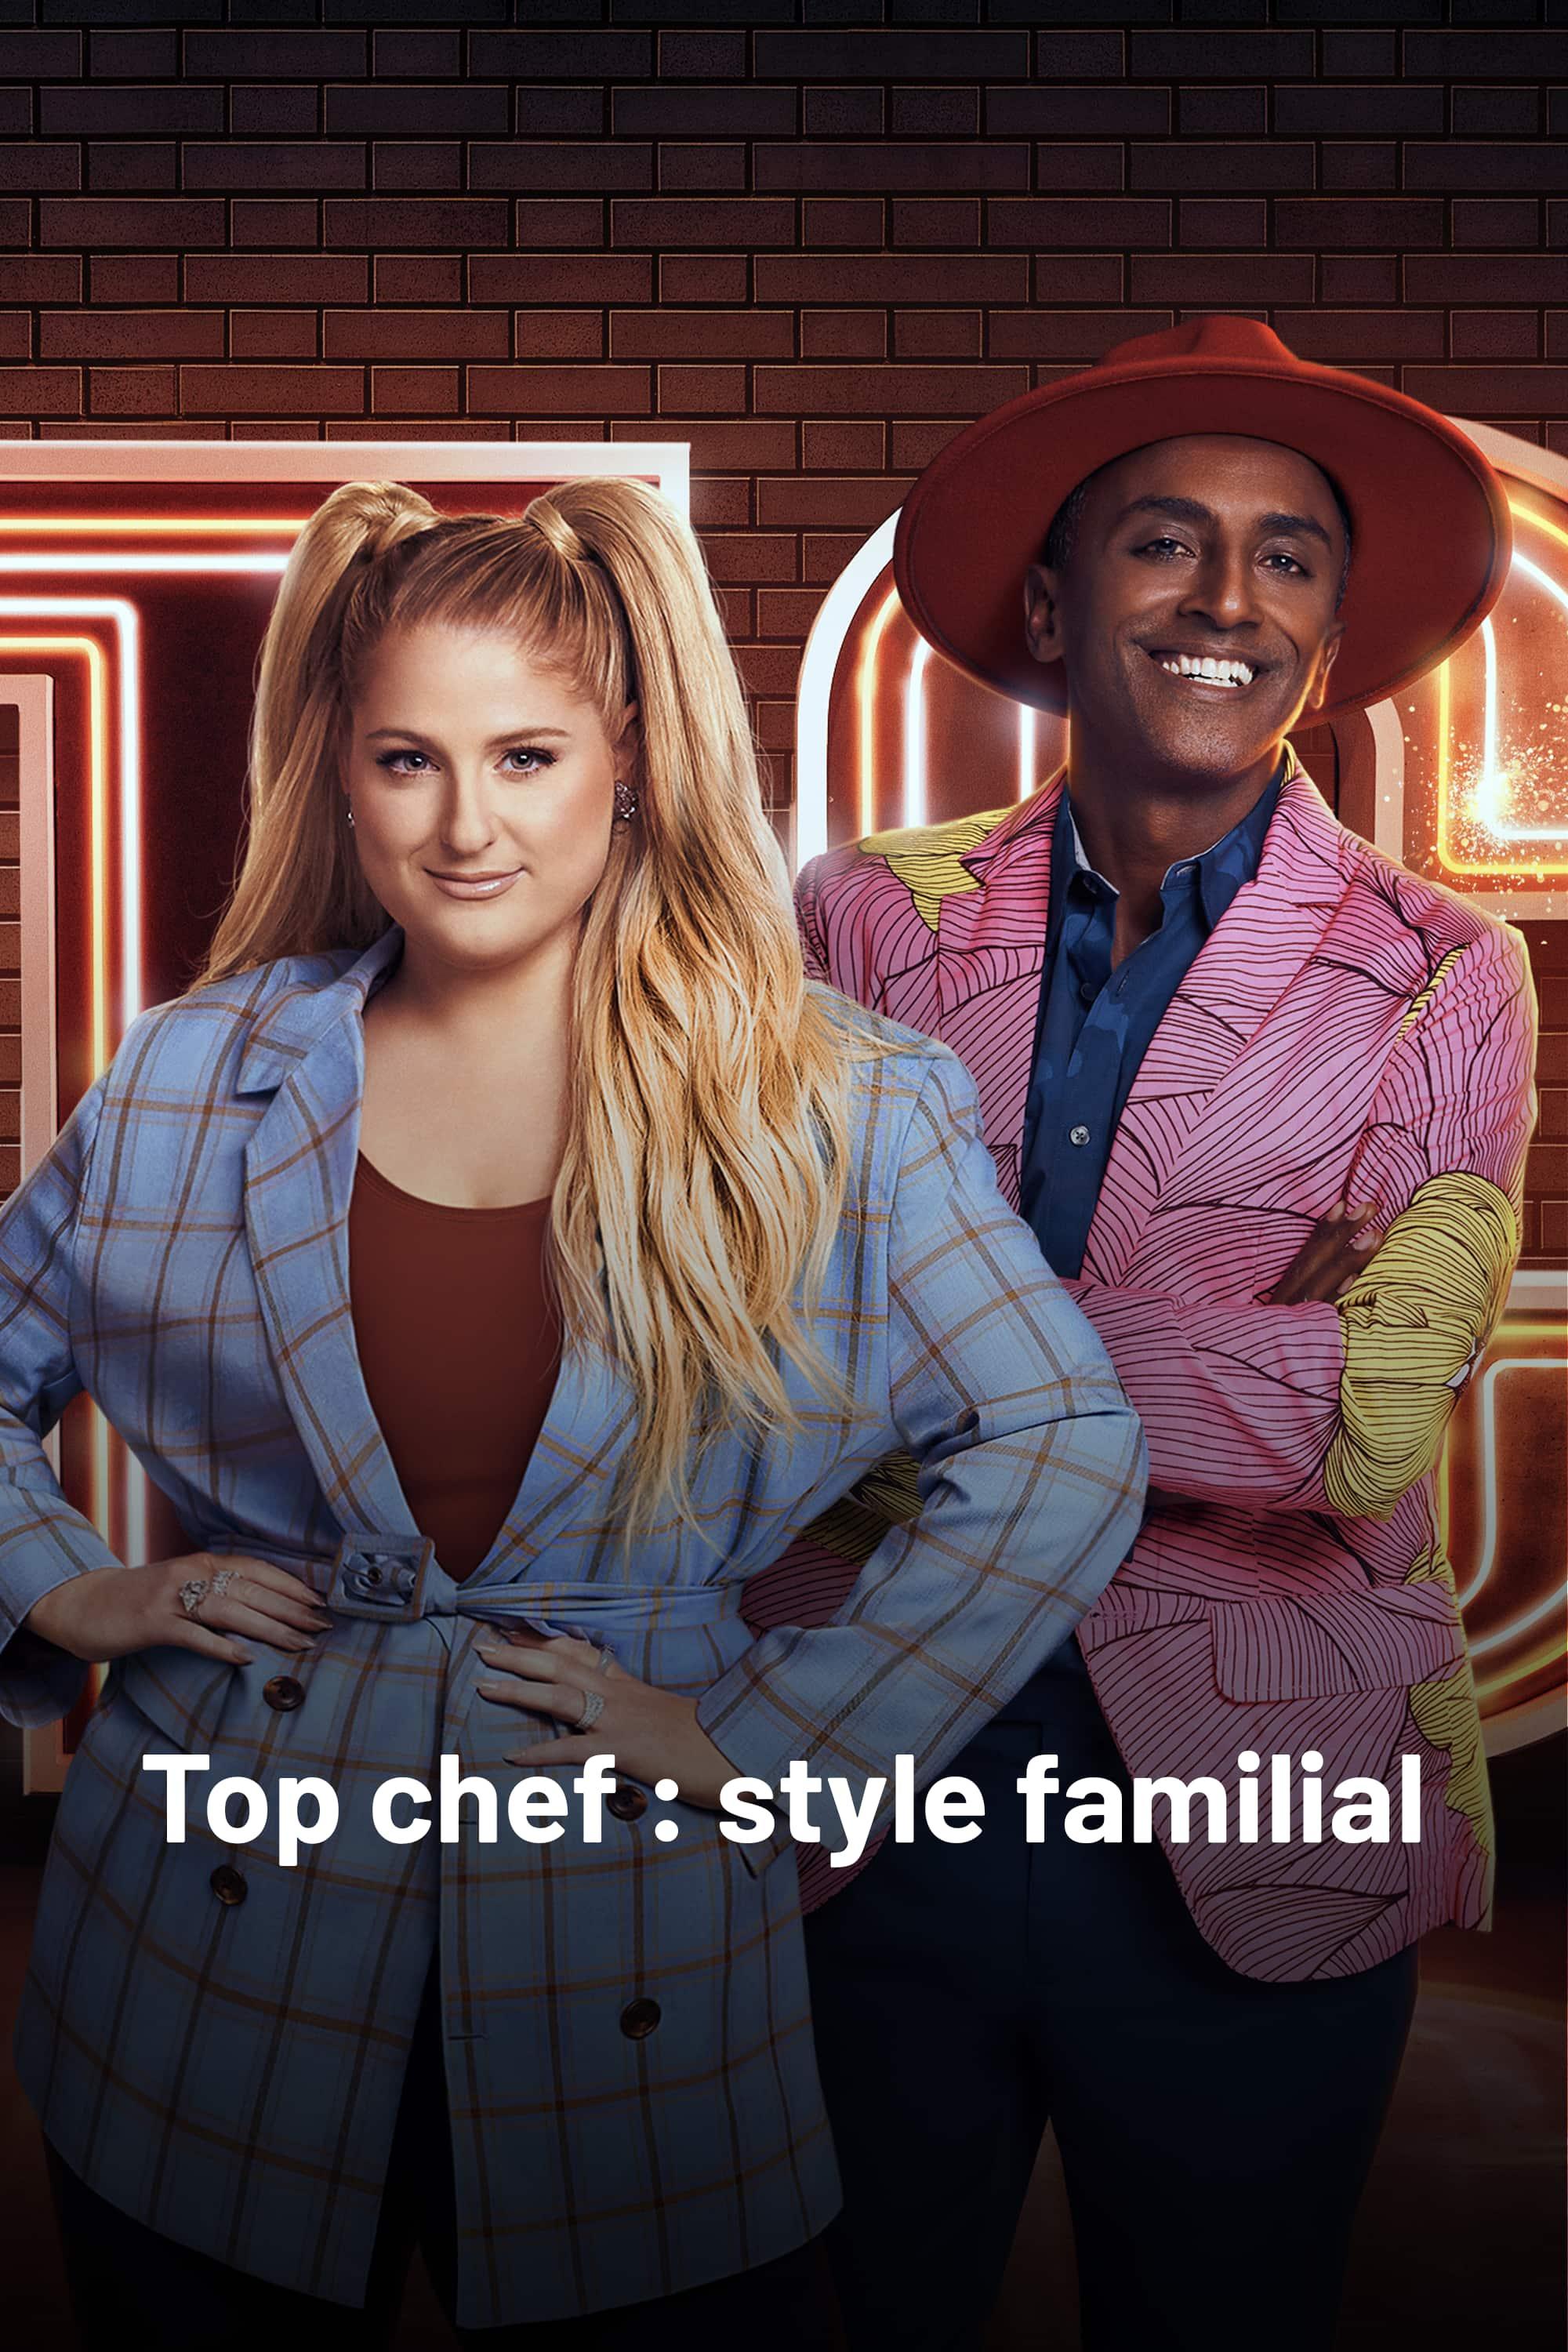 Top chef : style familial